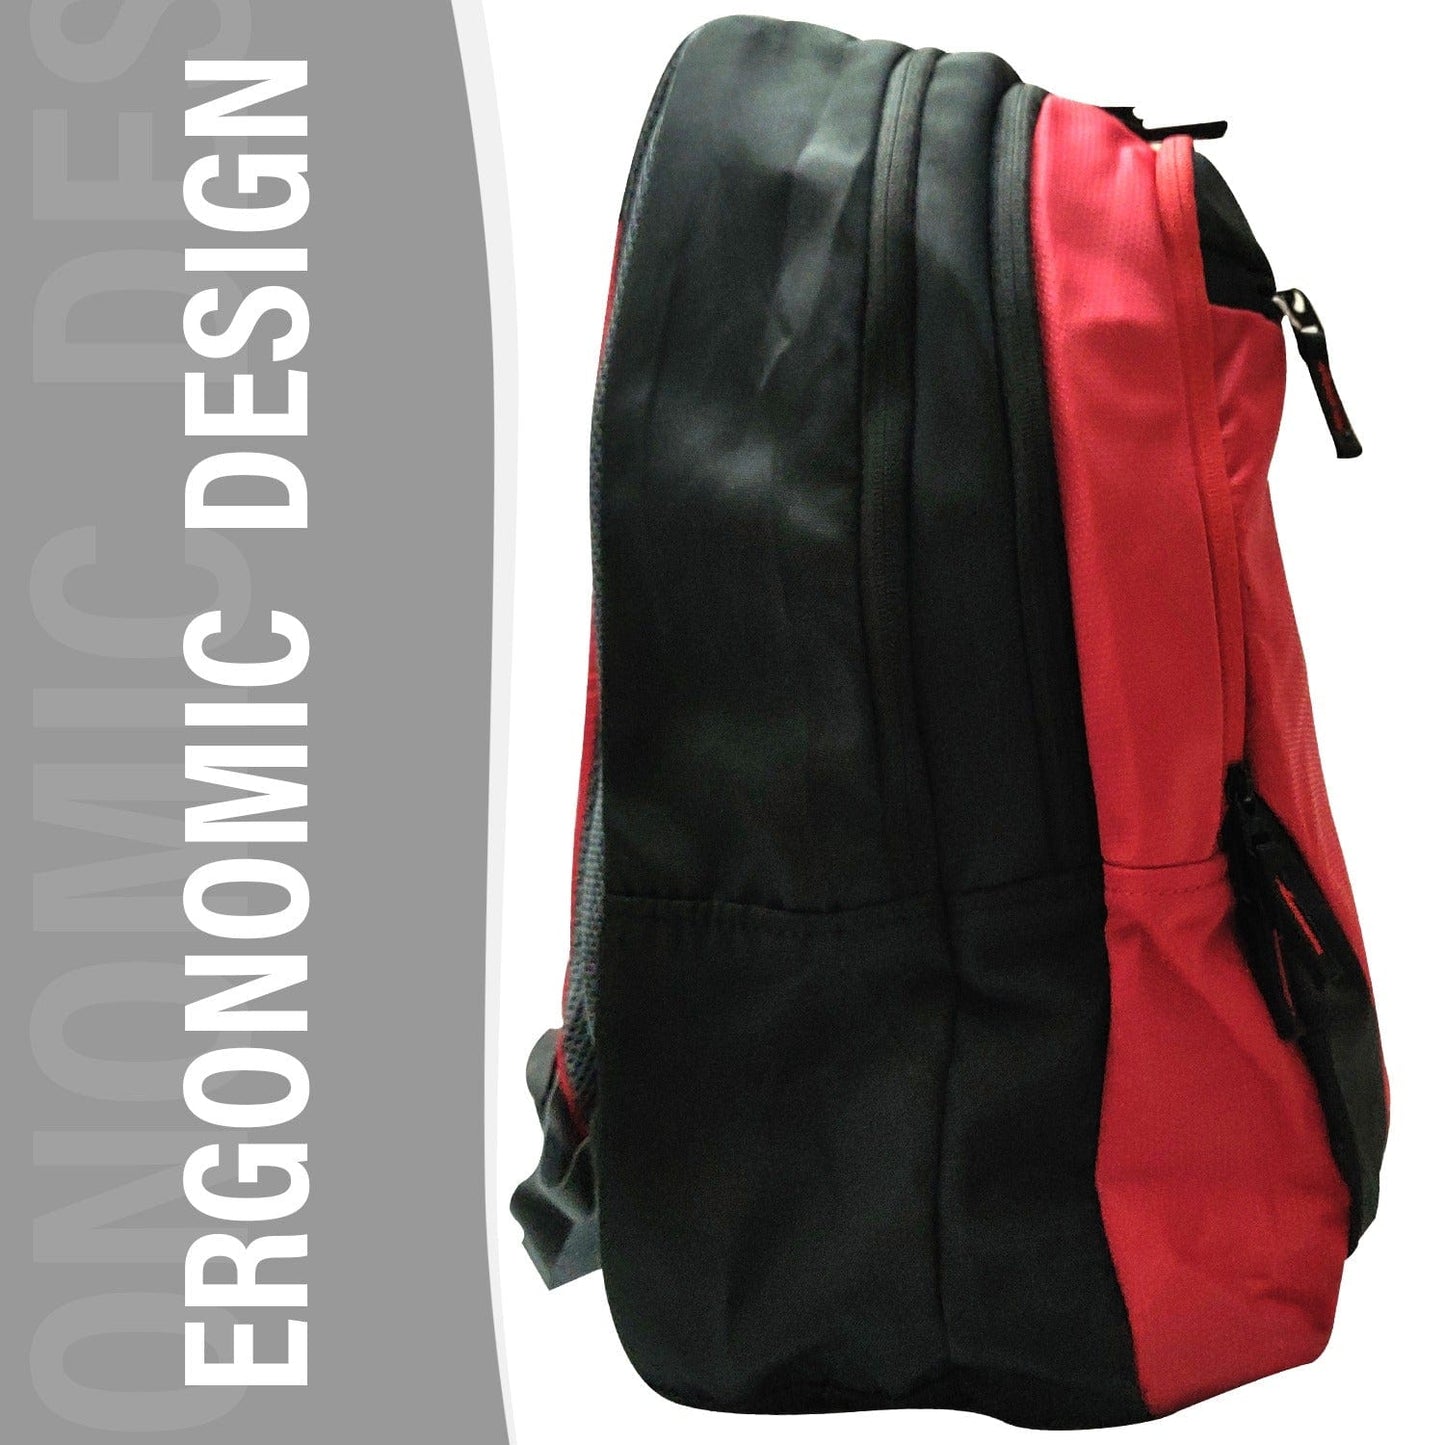 ANSIO School Pack with 4 Compartments Luggage & Bags